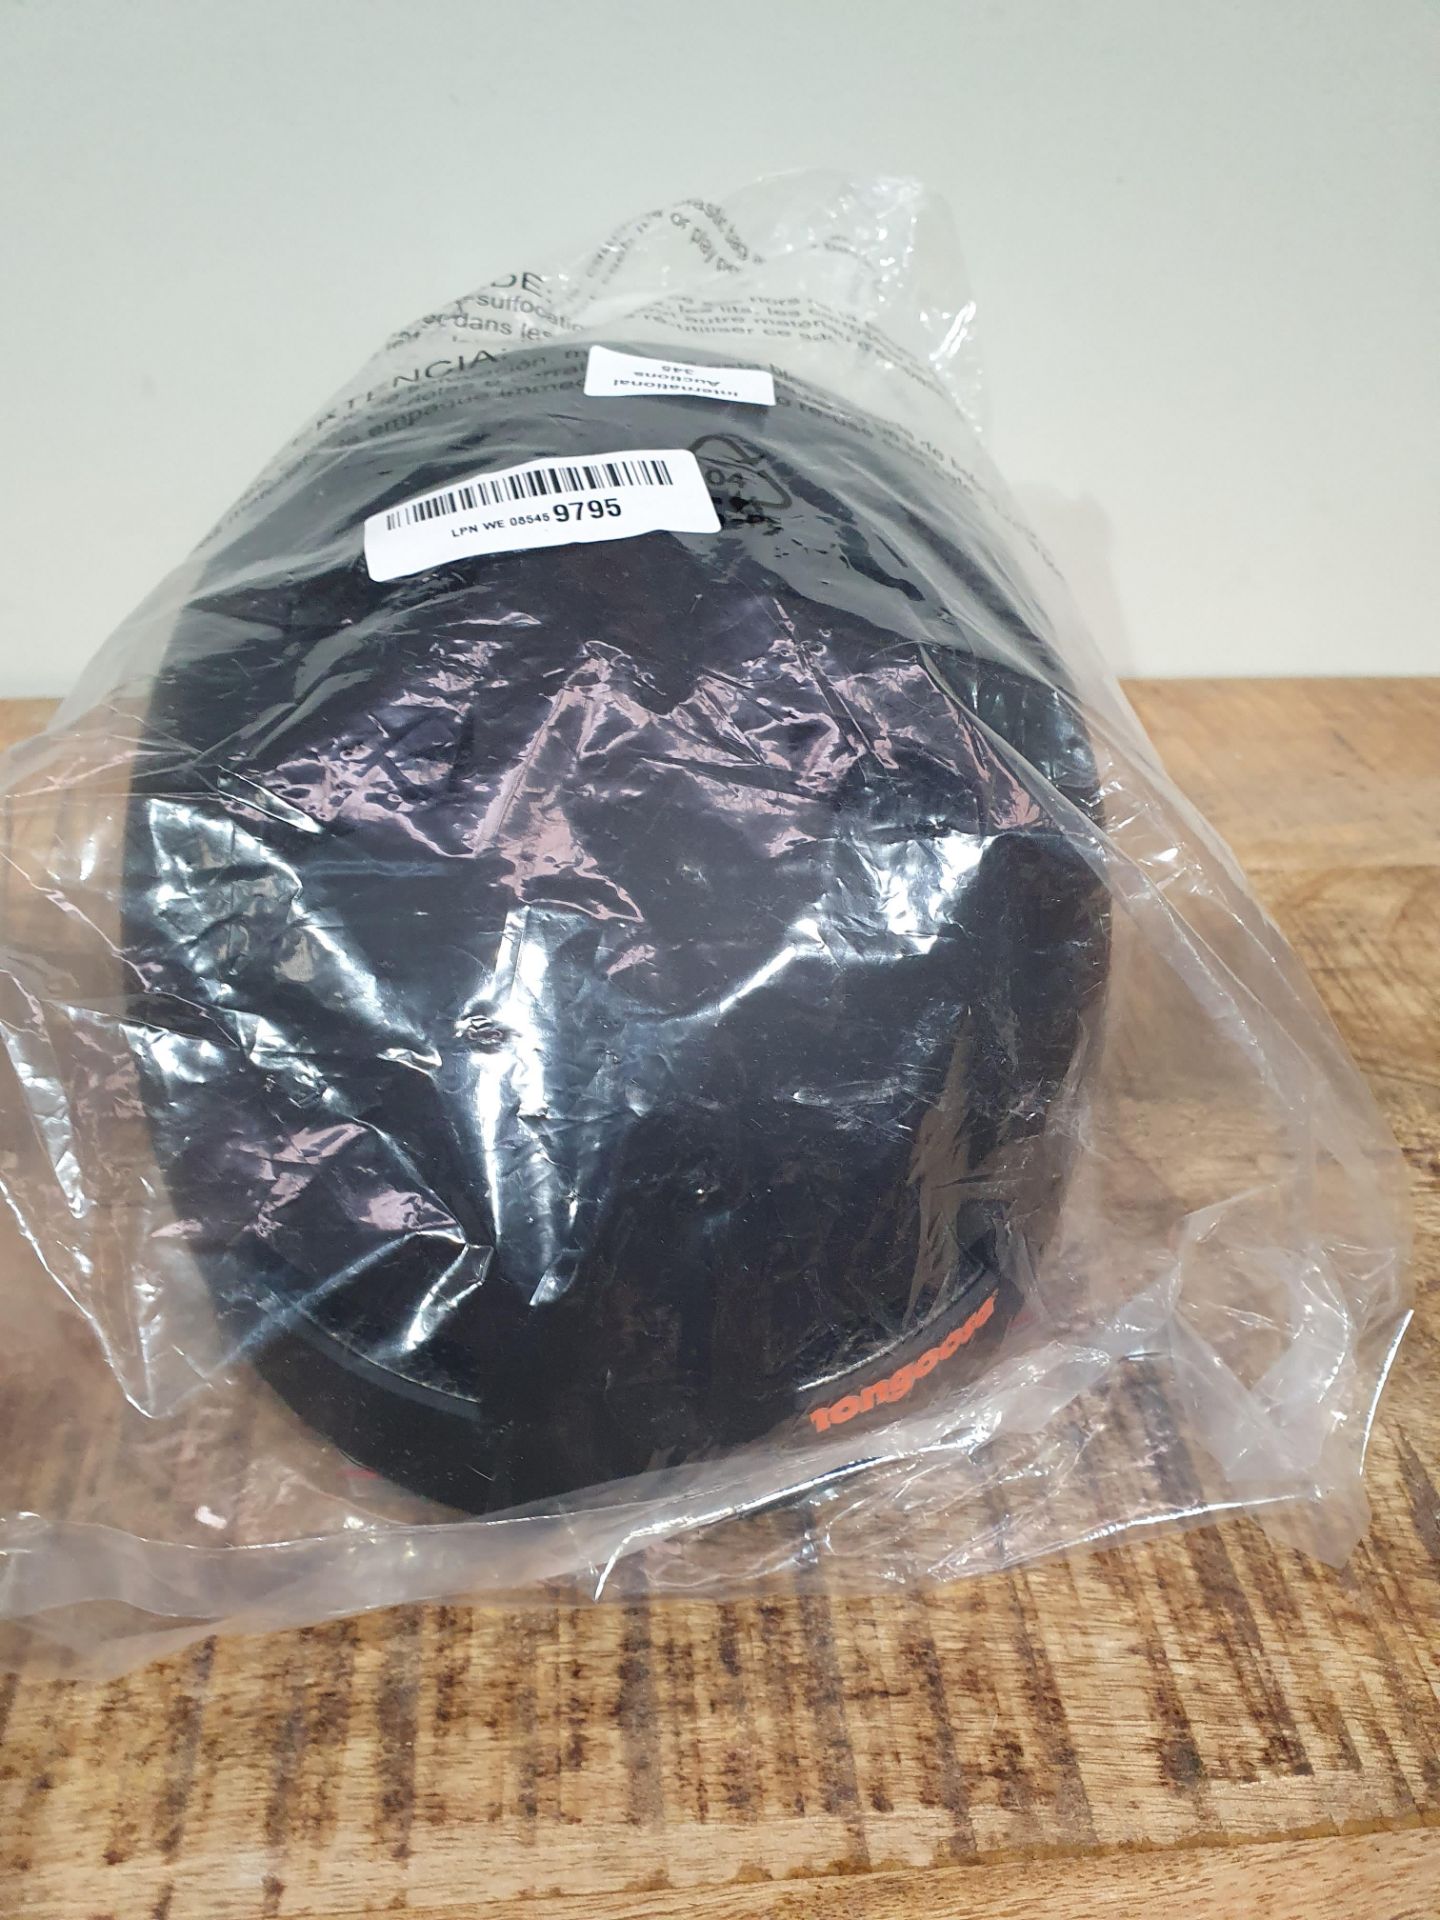 MONGOOSE HELMET RRP £15 Condition ReportAppraisal Available on Request - All Items are Unchecked/